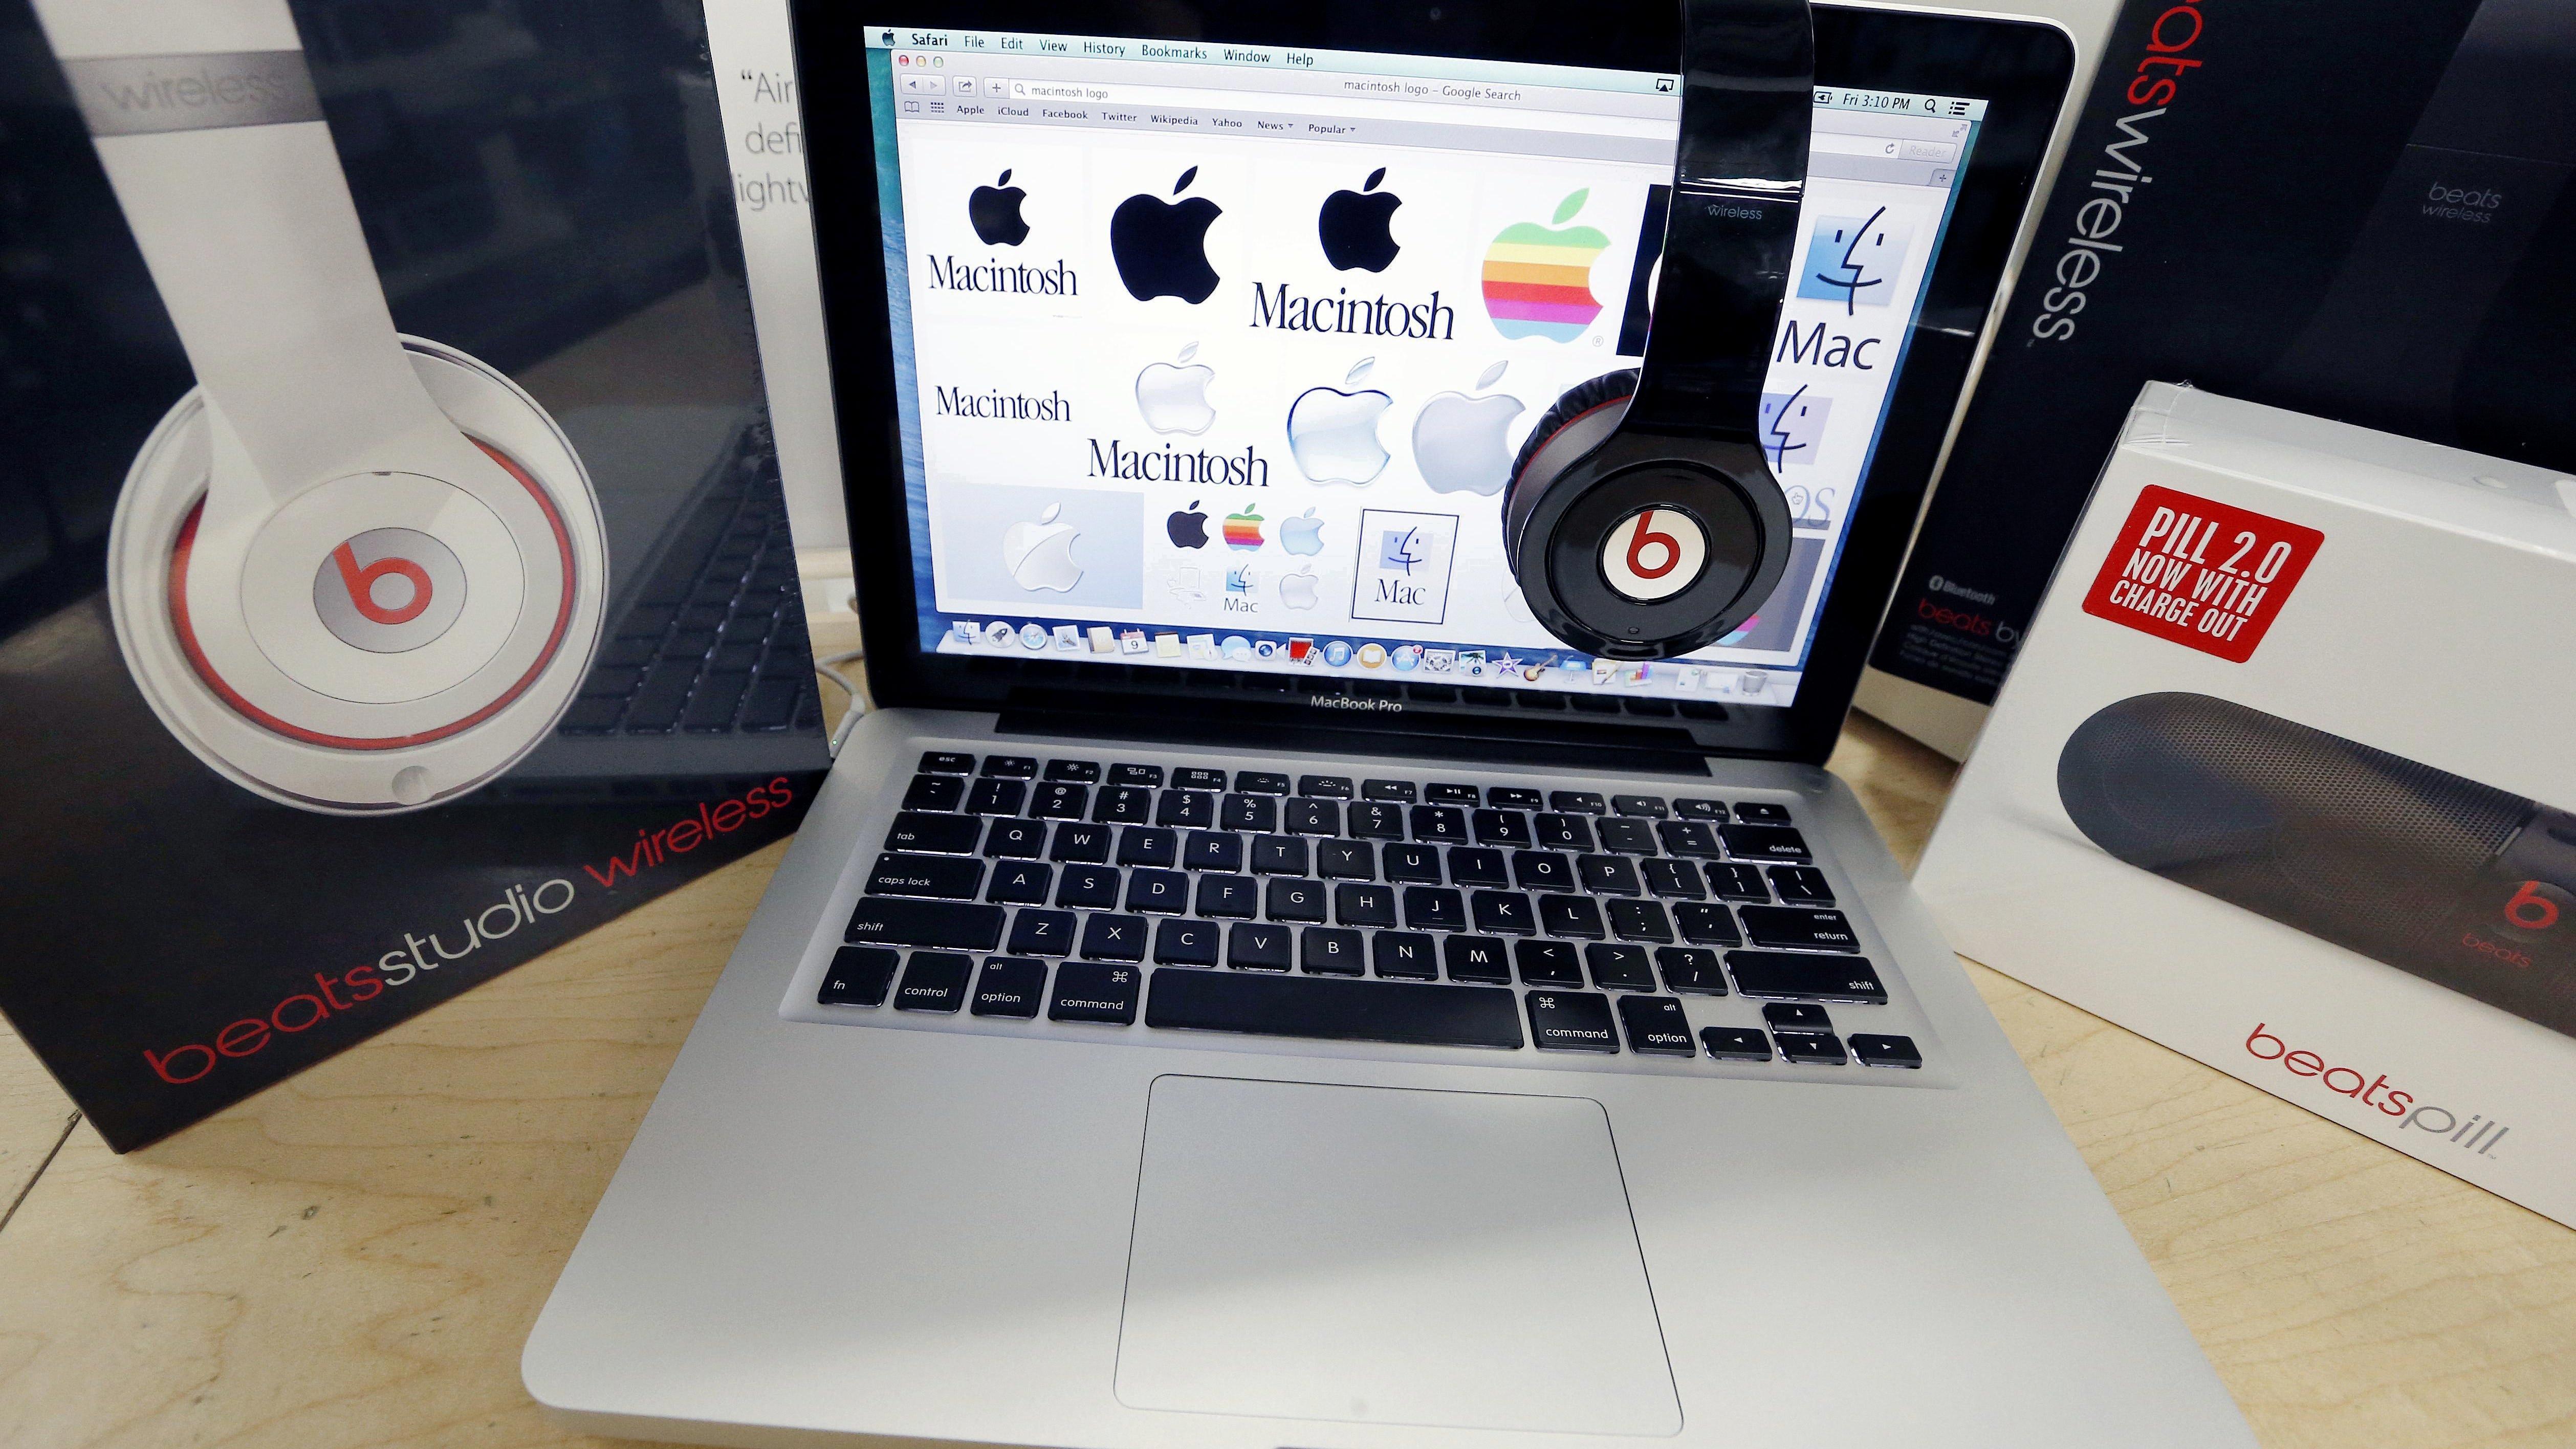 Are Macbooks still coming with Beats? 3